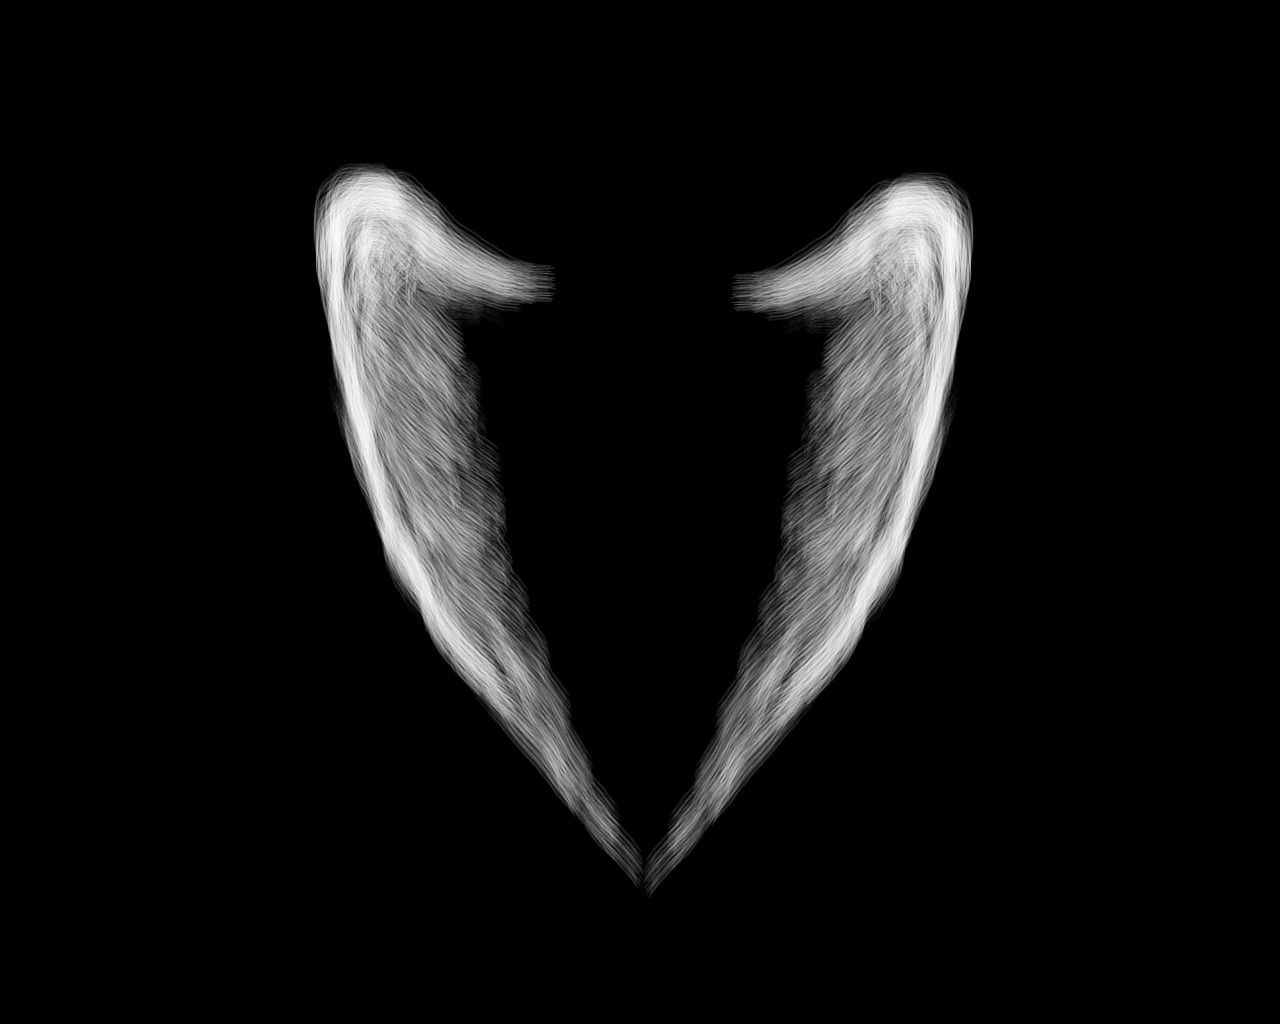 Angel Wing Wallpaper Top HD Image Le Hq